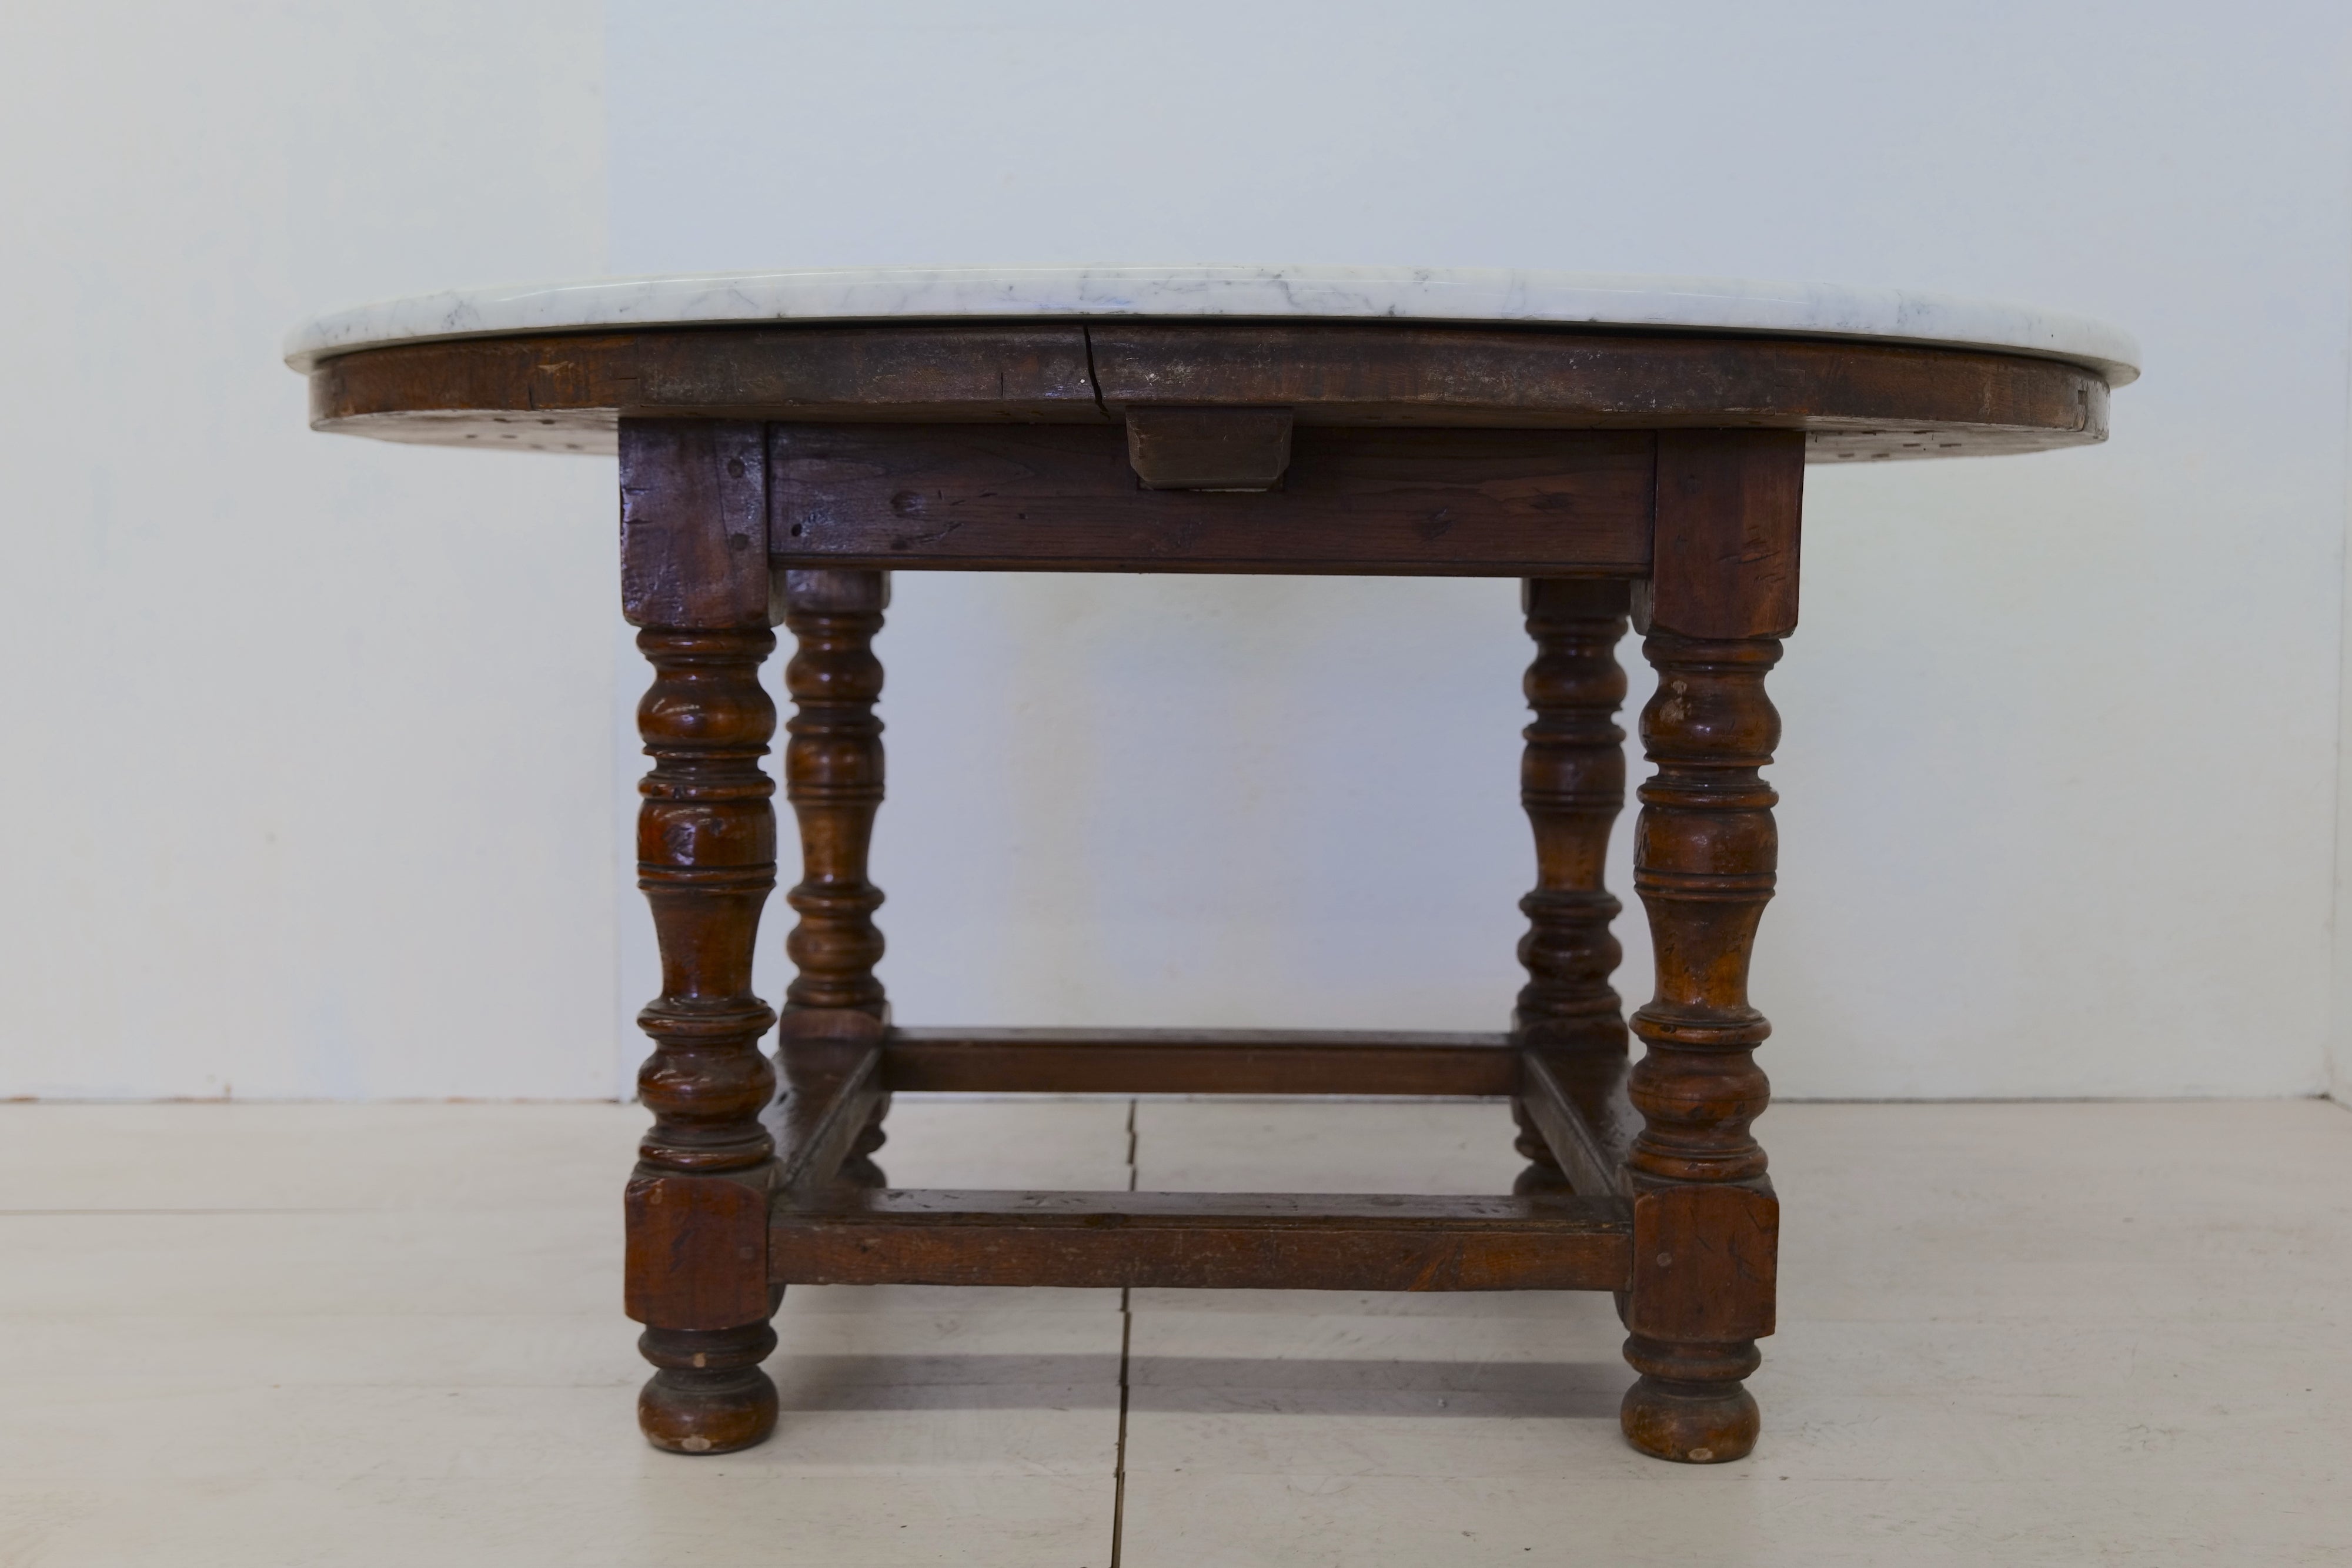 18th Century Oversize Wood and Marble Dining Table